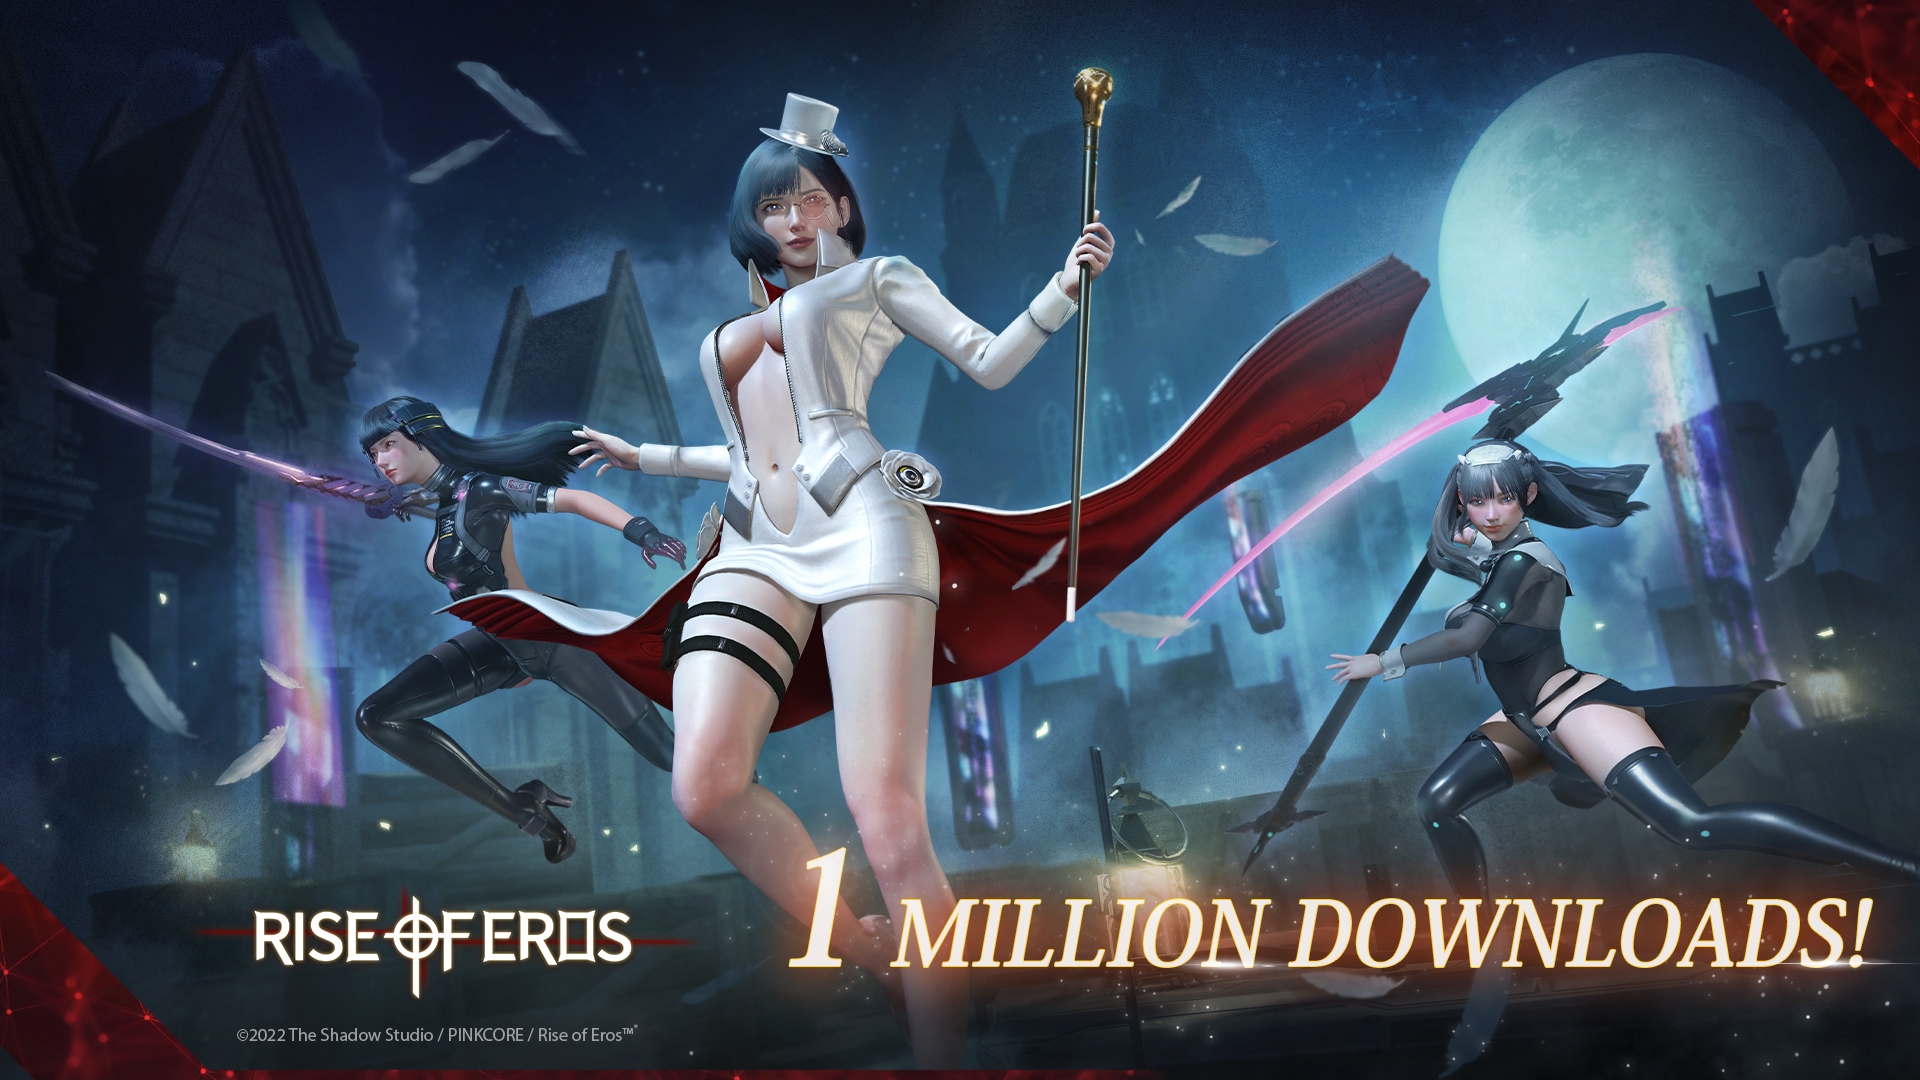 We're celebrating more than 1,000,000 downloads of Rise of Eros!